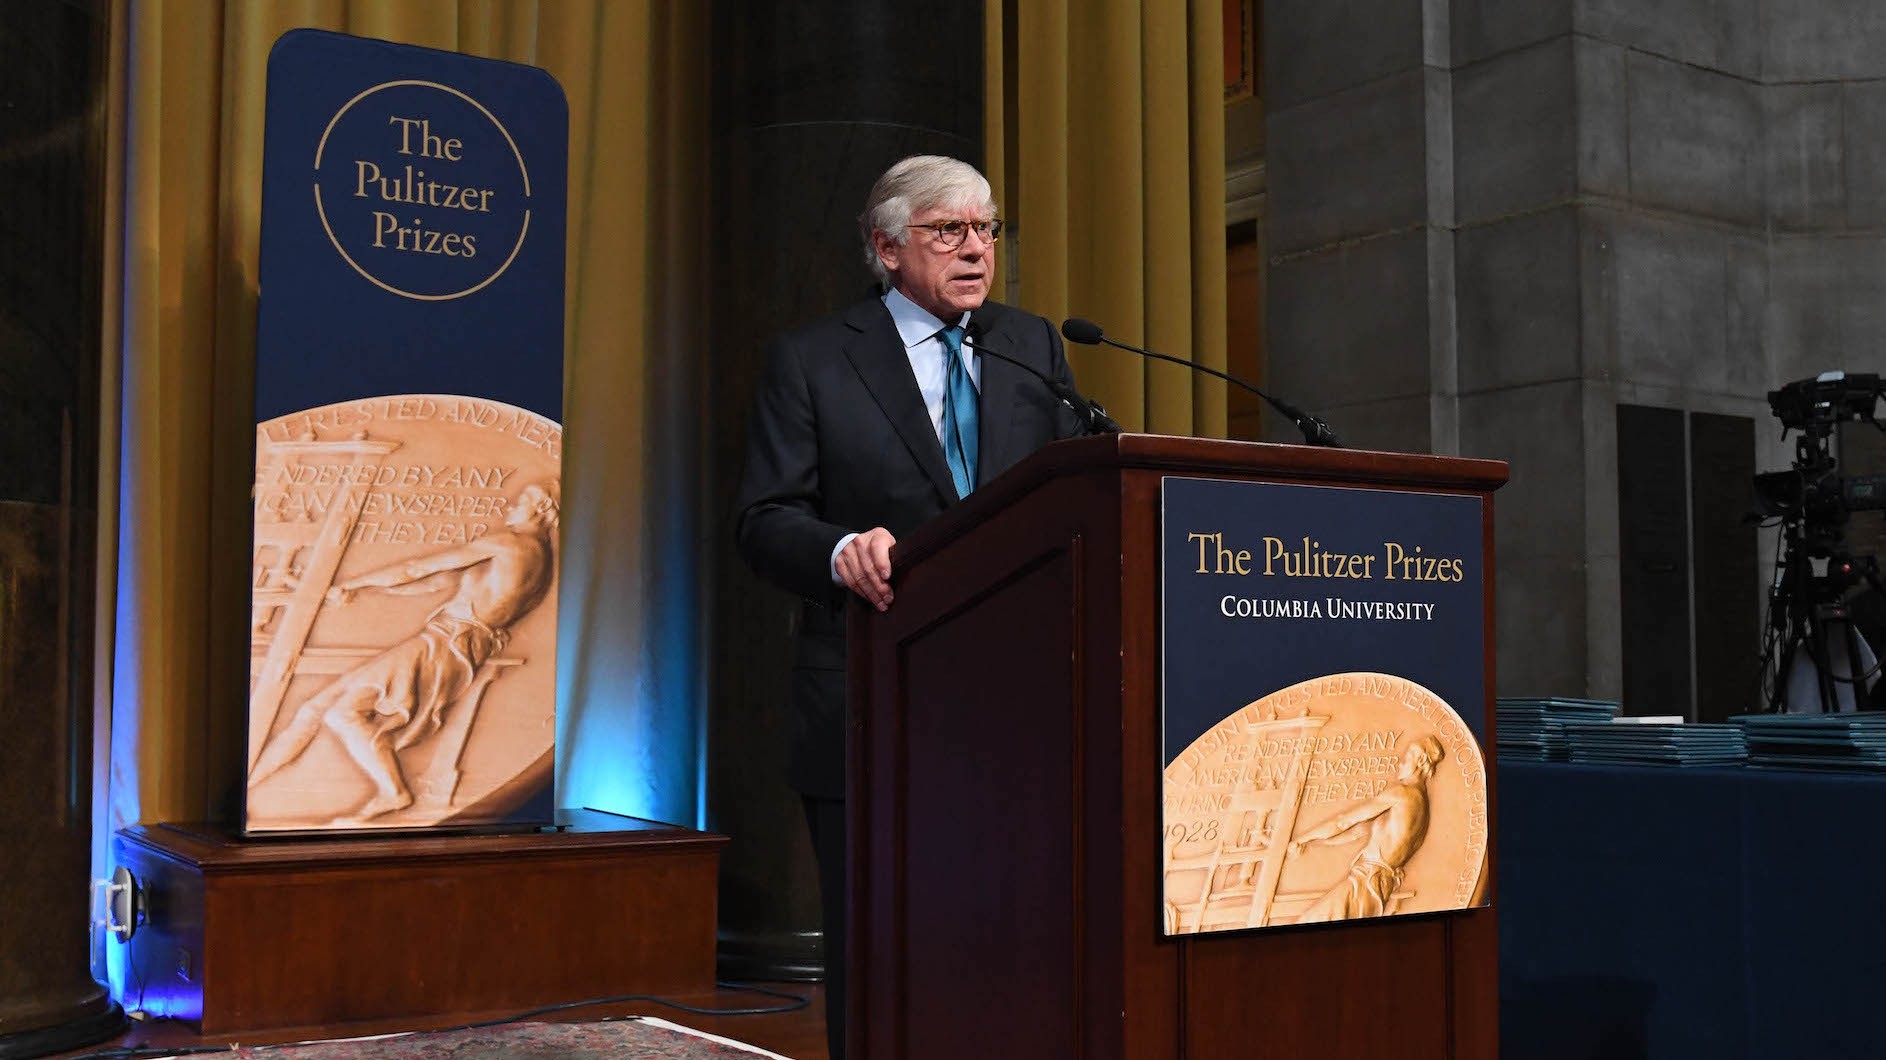 President Lee C. Bollinger speaking at the 2019 Pulitzer Prizes luncheon in Low Memorial Library